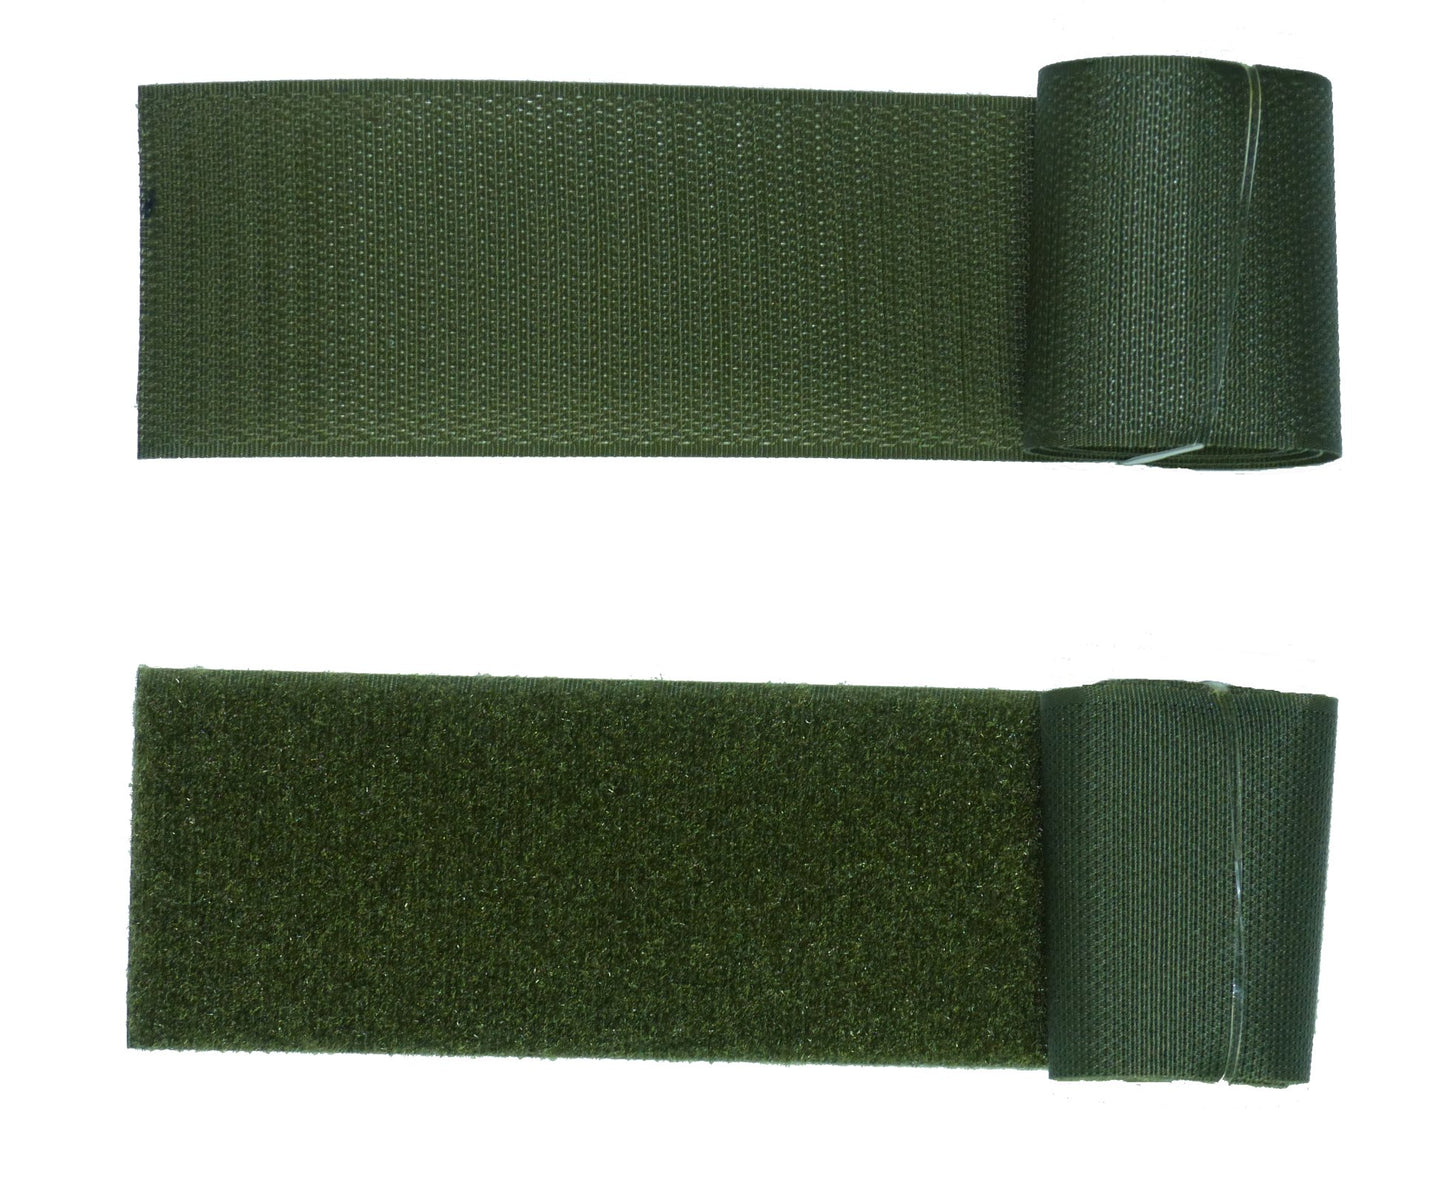 Benristraps 50mm sewable hook and loop tape in green